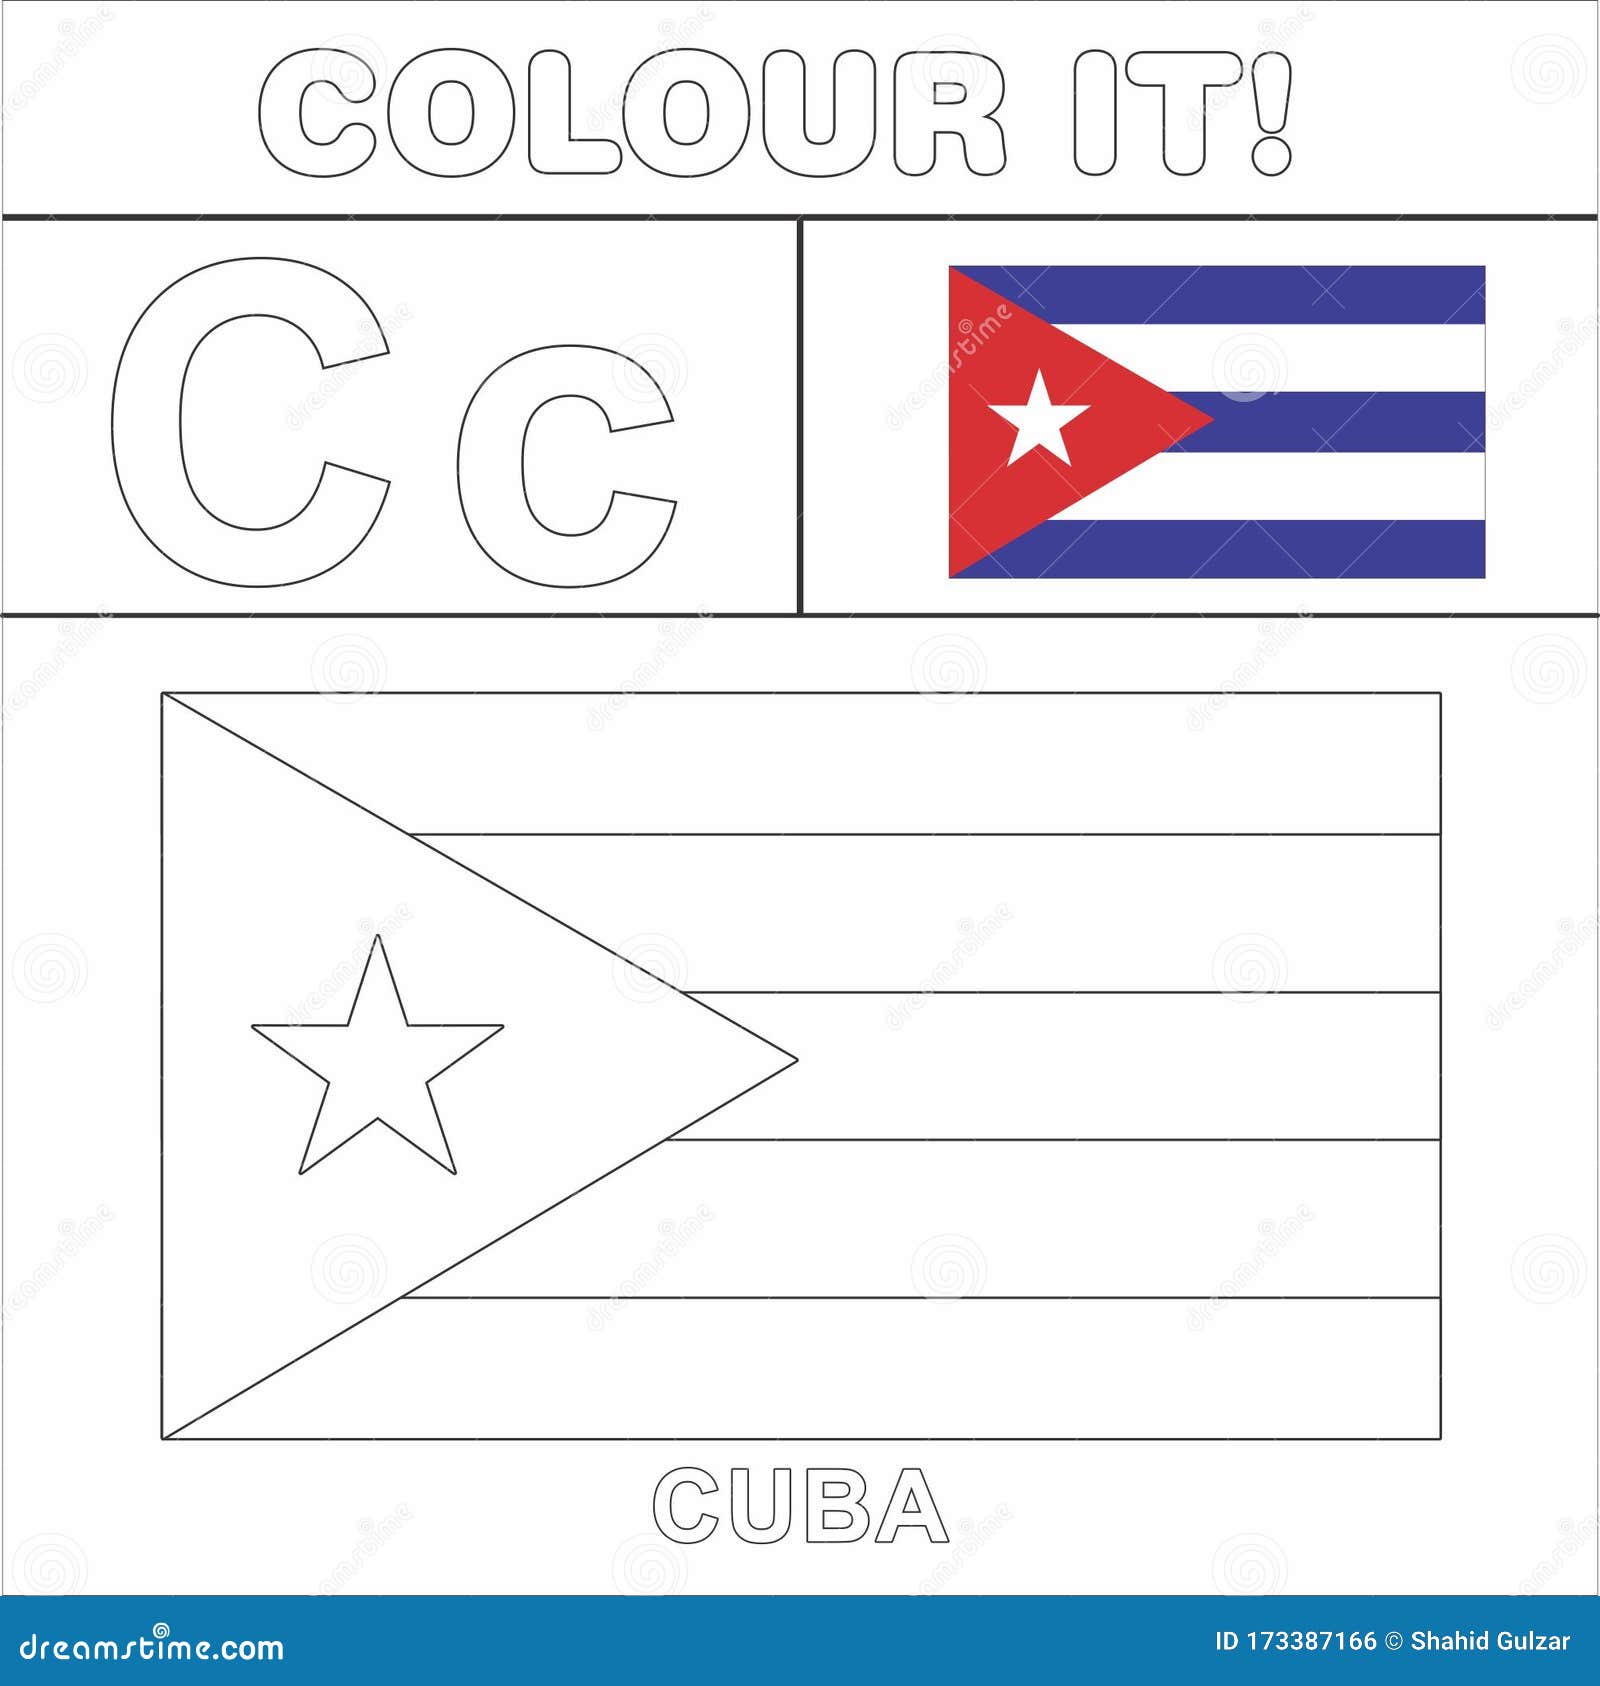 Colour it kids colouring page country starting from english letter c cuba how to color flag stock illustration